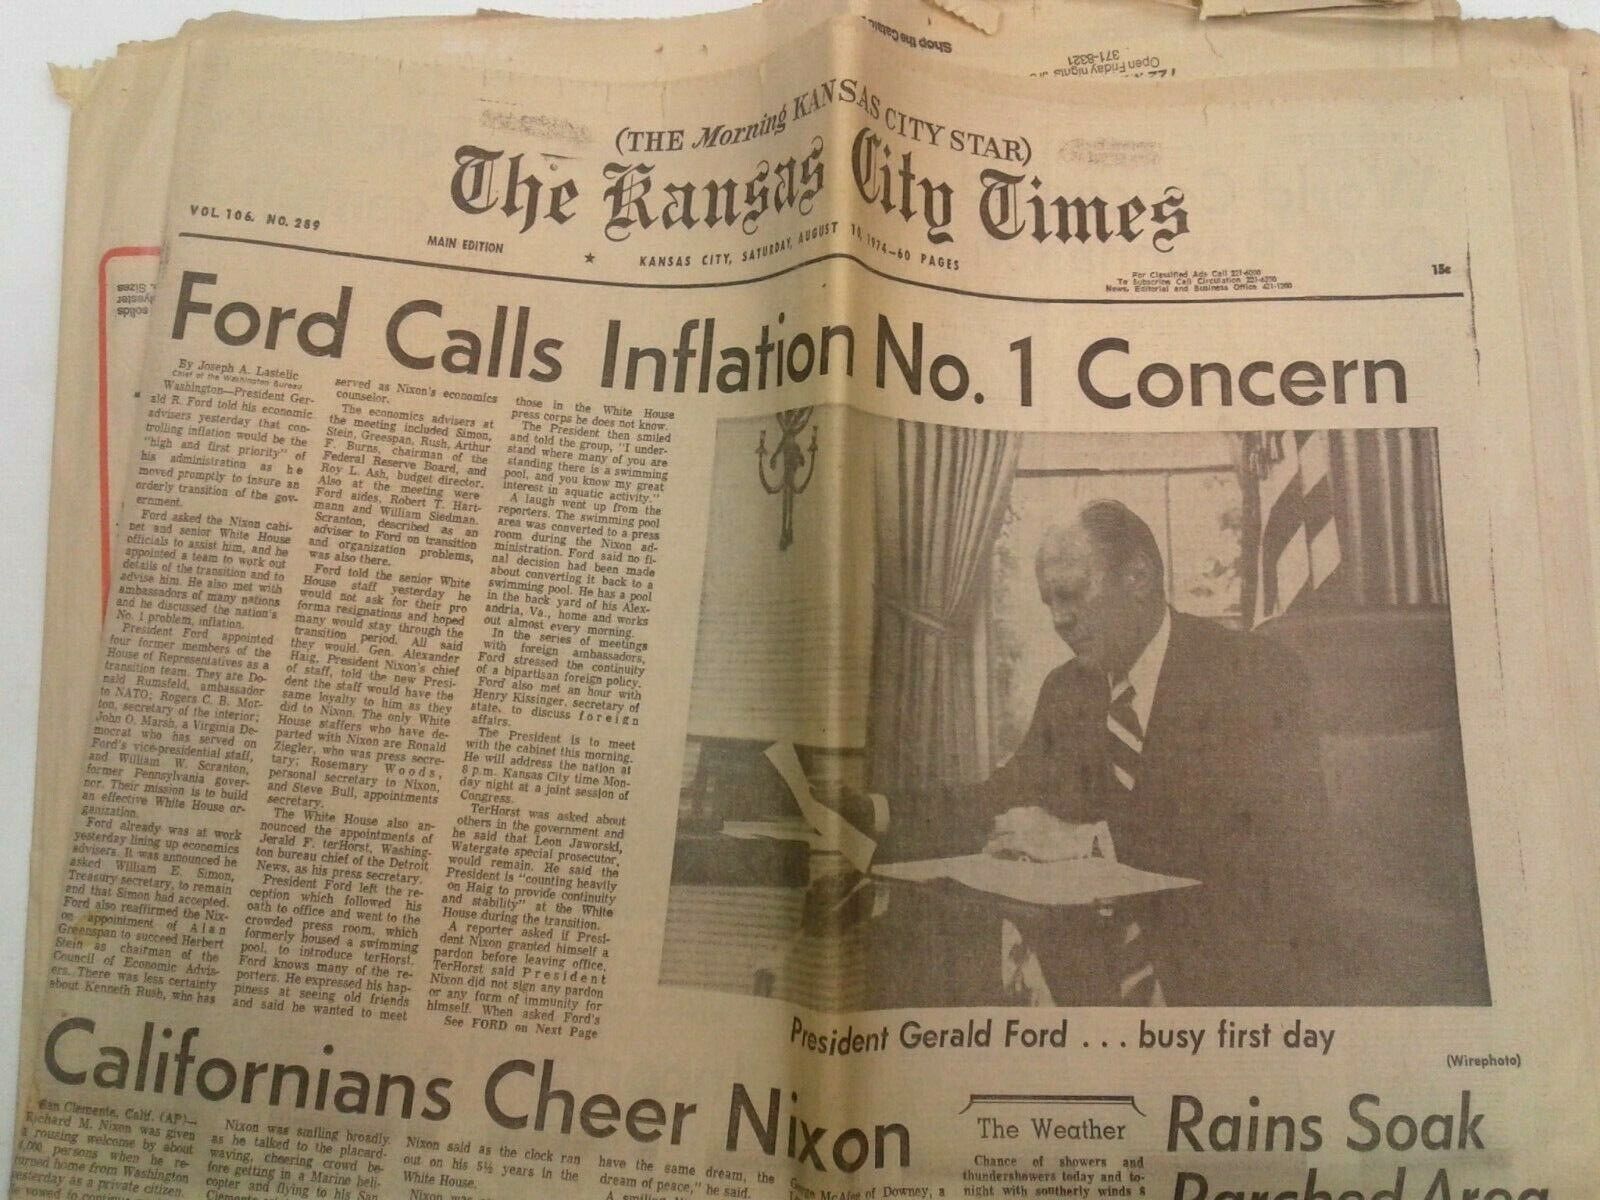 AUG 10 1974 KANSAS CITY TIMES newspaper section - BUSY FIRST DAY